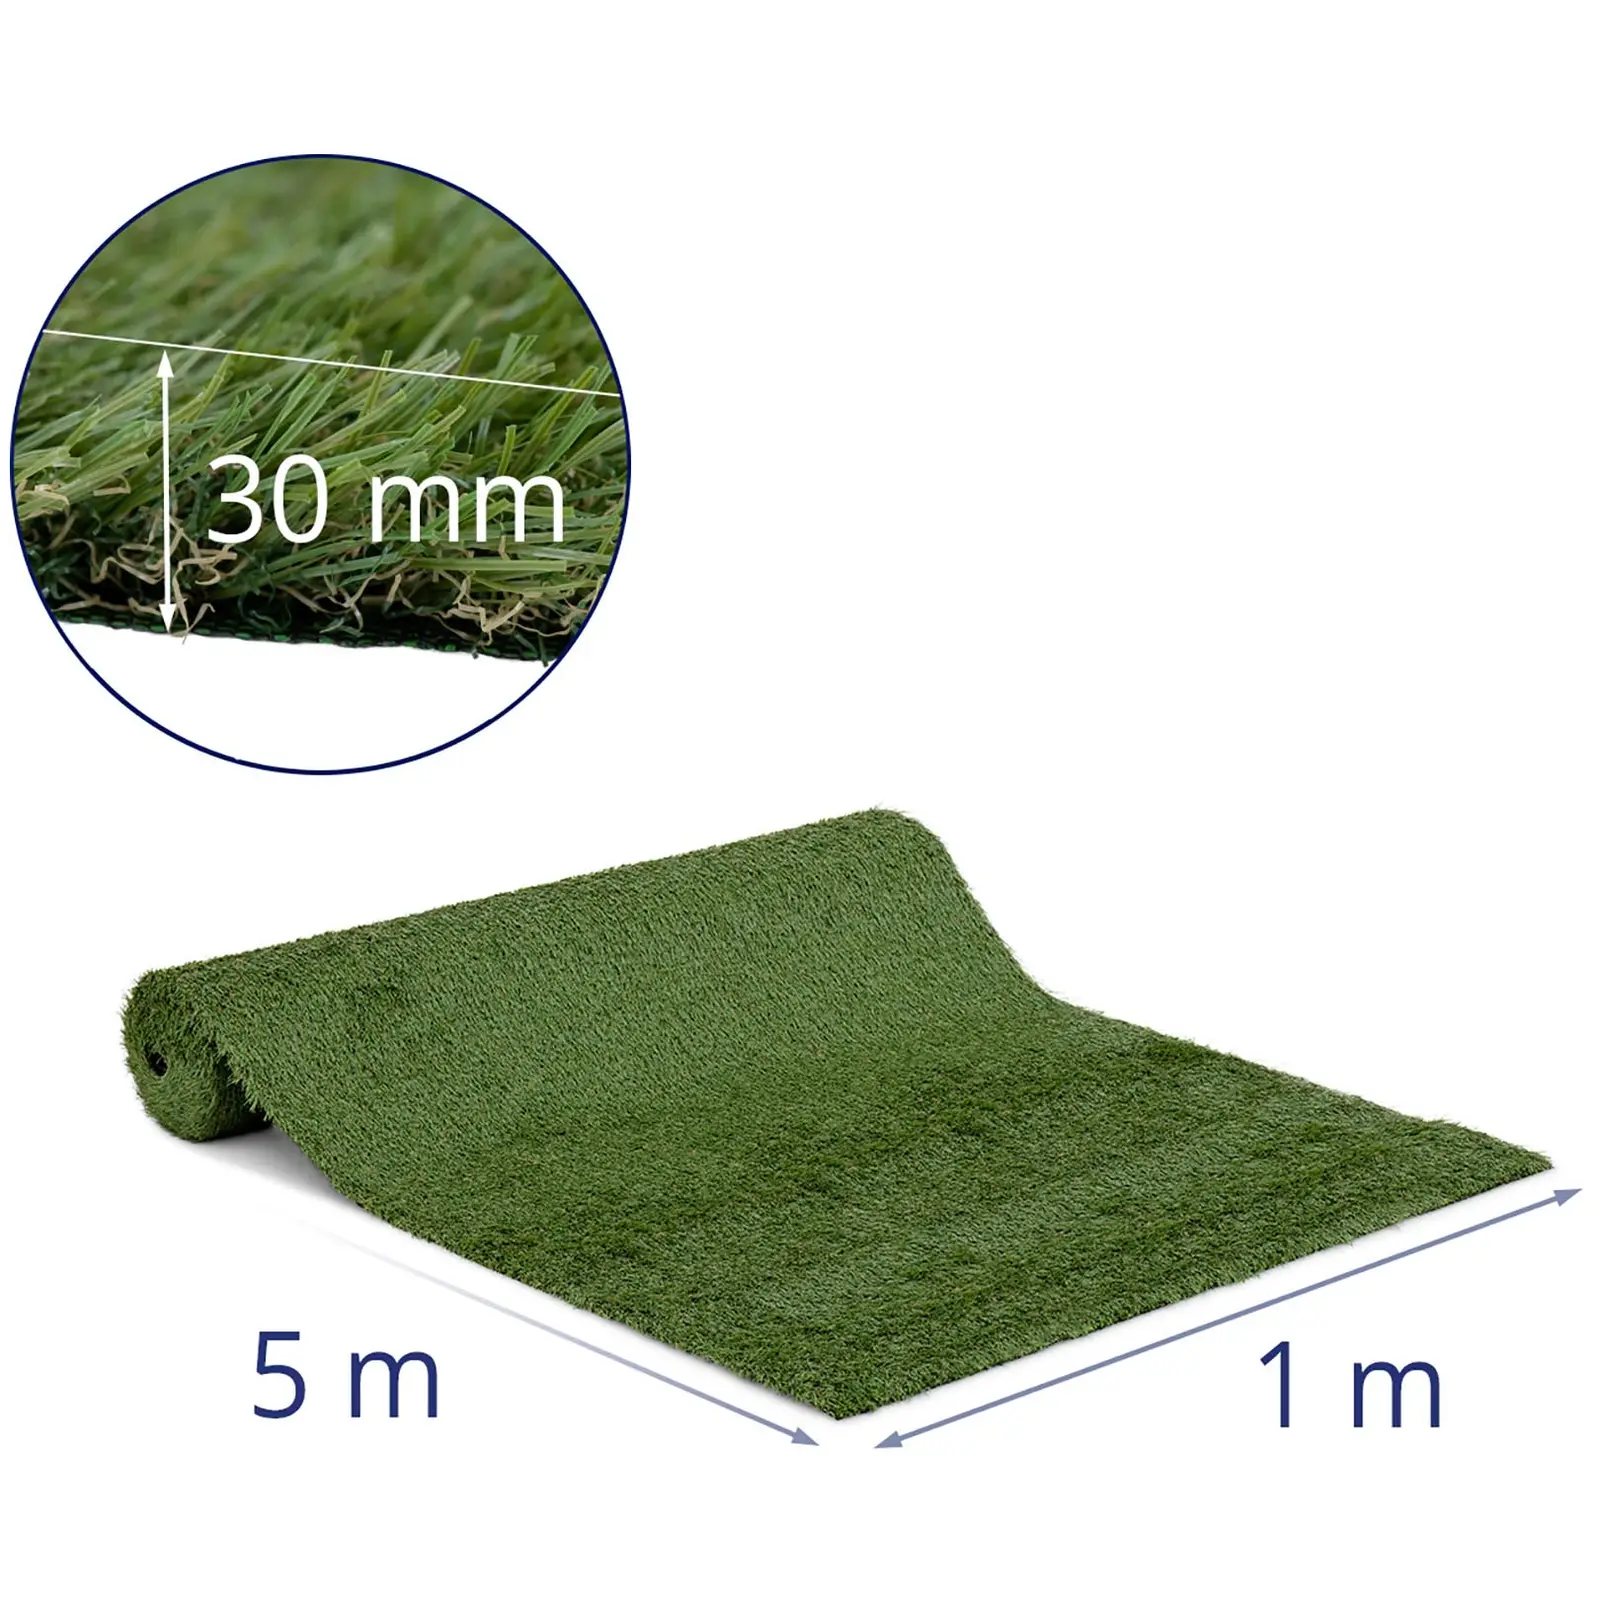 Artificial grass - 100 x 500 cm - Height: 30 mm - Stitch rate: 14/10 cm - UV-resistant